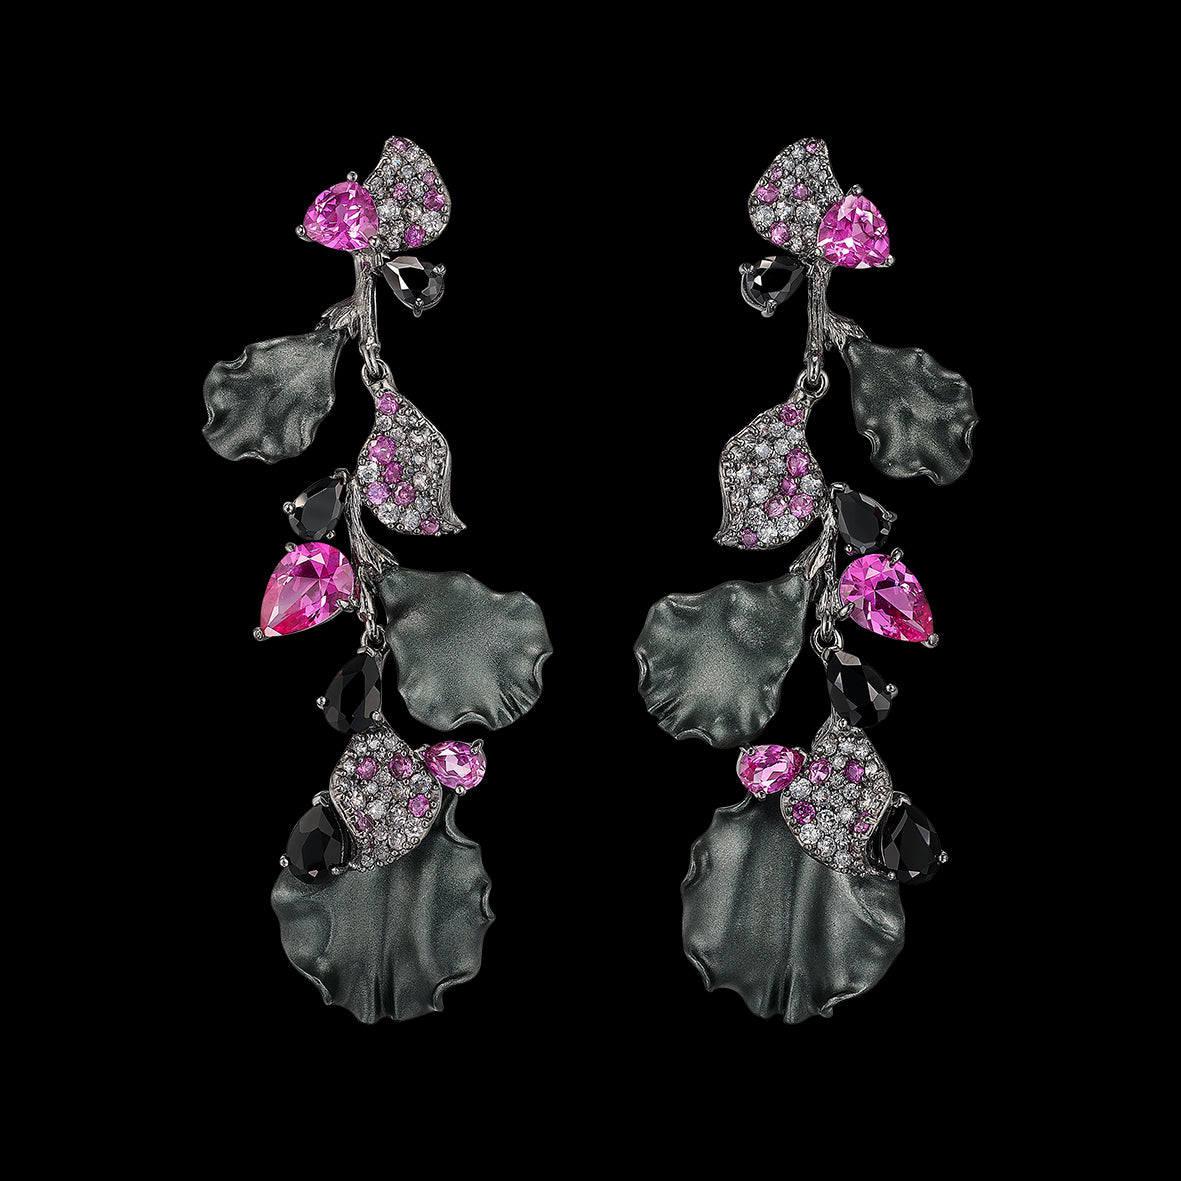 Black Pink Thea Earrings, Earrings, Anabela Chan Joaillerie - Fine jewelry with laboratory grown and created gemstones hand-crafted in the United Kingdom. Anabela Chan Joaillerie is the first fine jewellery brand in the world to champion laboratory-grown and created gemstones with high jewellery design, artisanal craftsmanship and a focus on ethical and sustainable innovations.